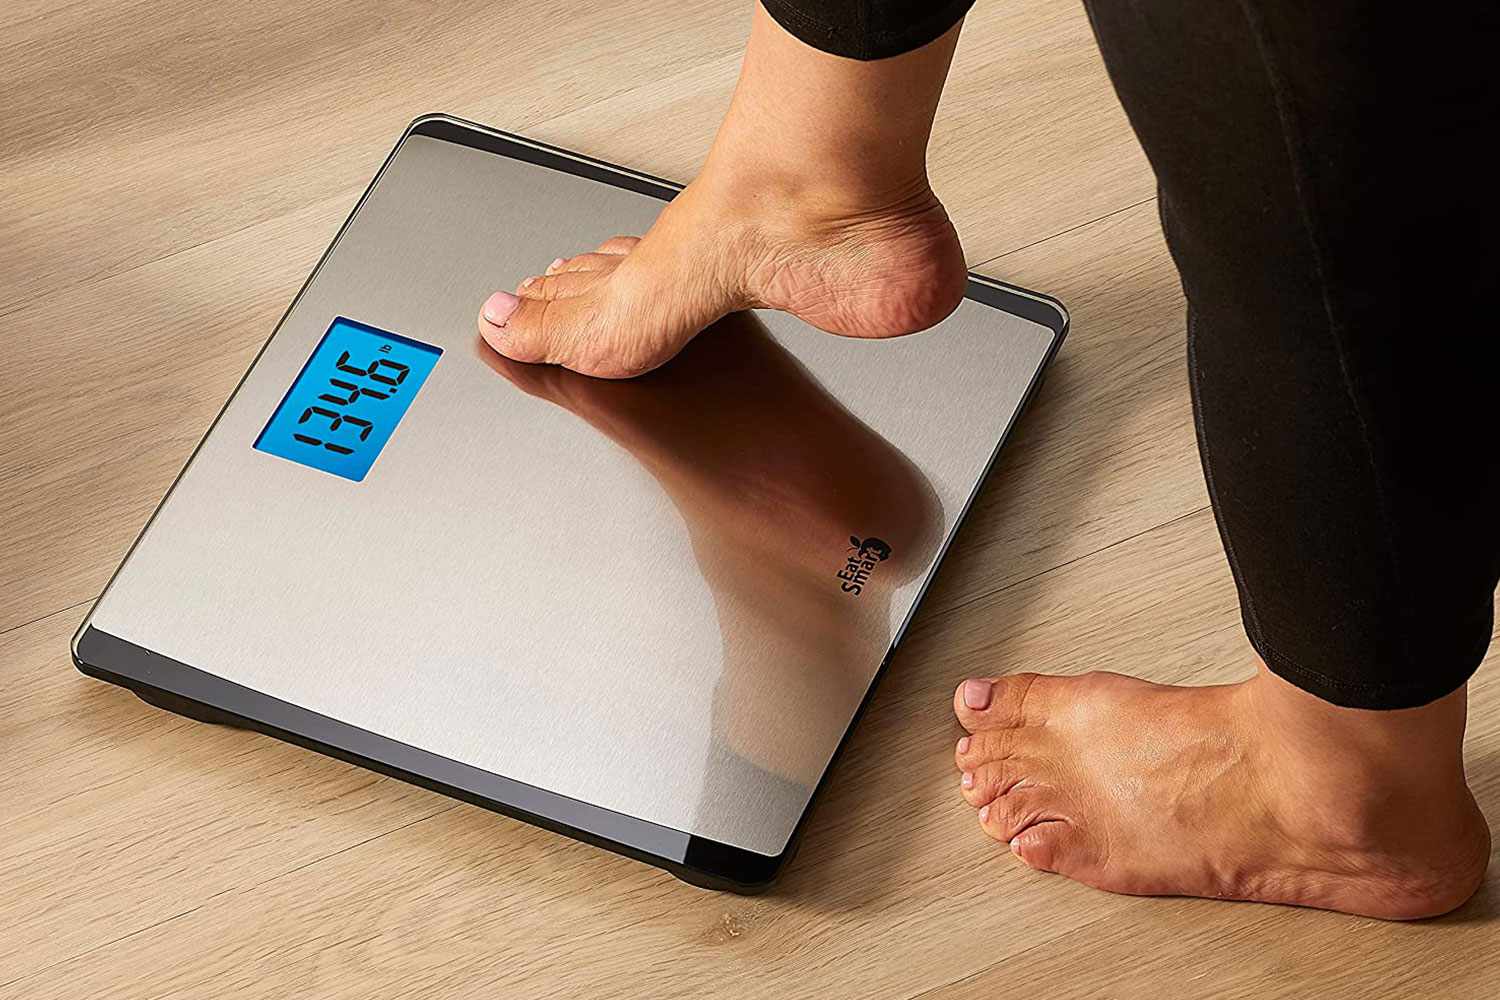 10-best-body-weight-scale